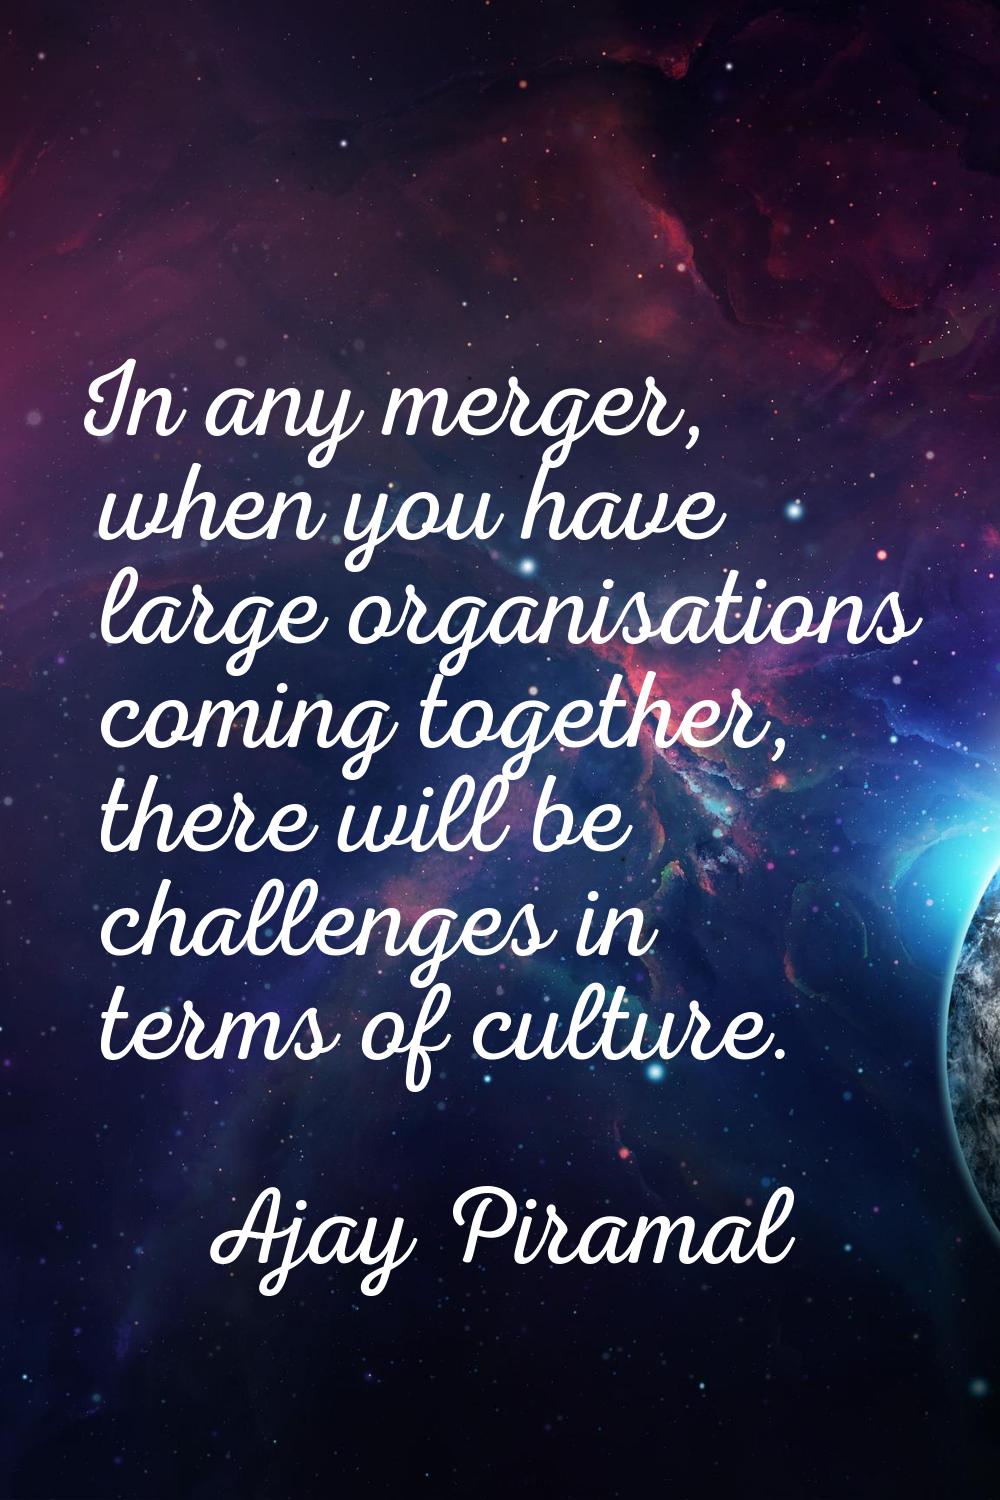 In any merger, when you have large organisations coming together, there will be challenges in terms